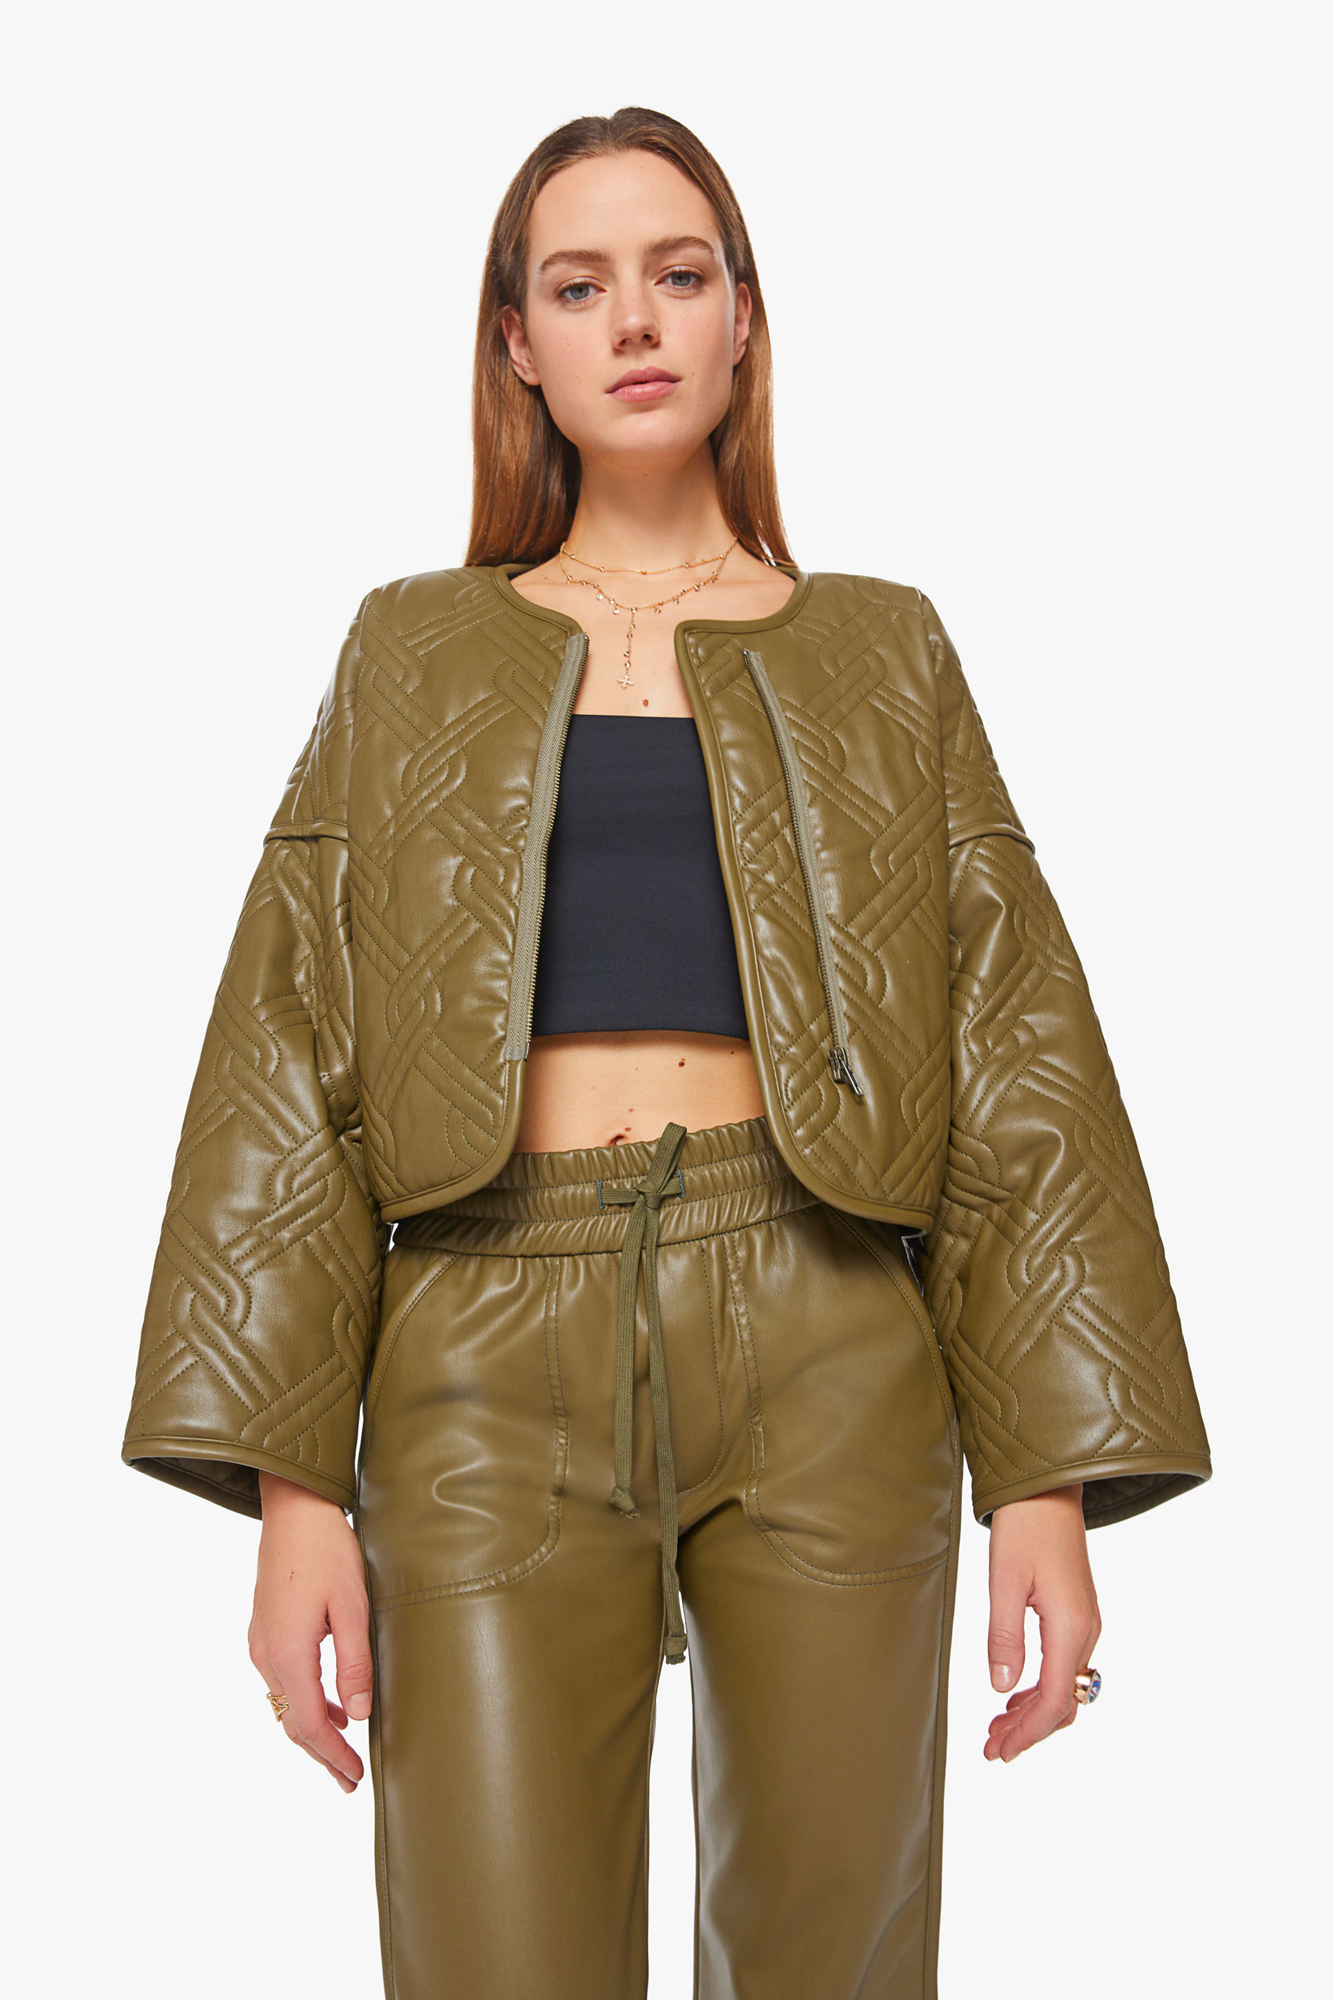 Elevate your wardrobe with The Underliner Jacket from Mother. Crafted from a luxurious faux leather fabric, this boxy jacket features drop shoulders, extra-wide long sleeves, and a cropped hem for a modern look. 